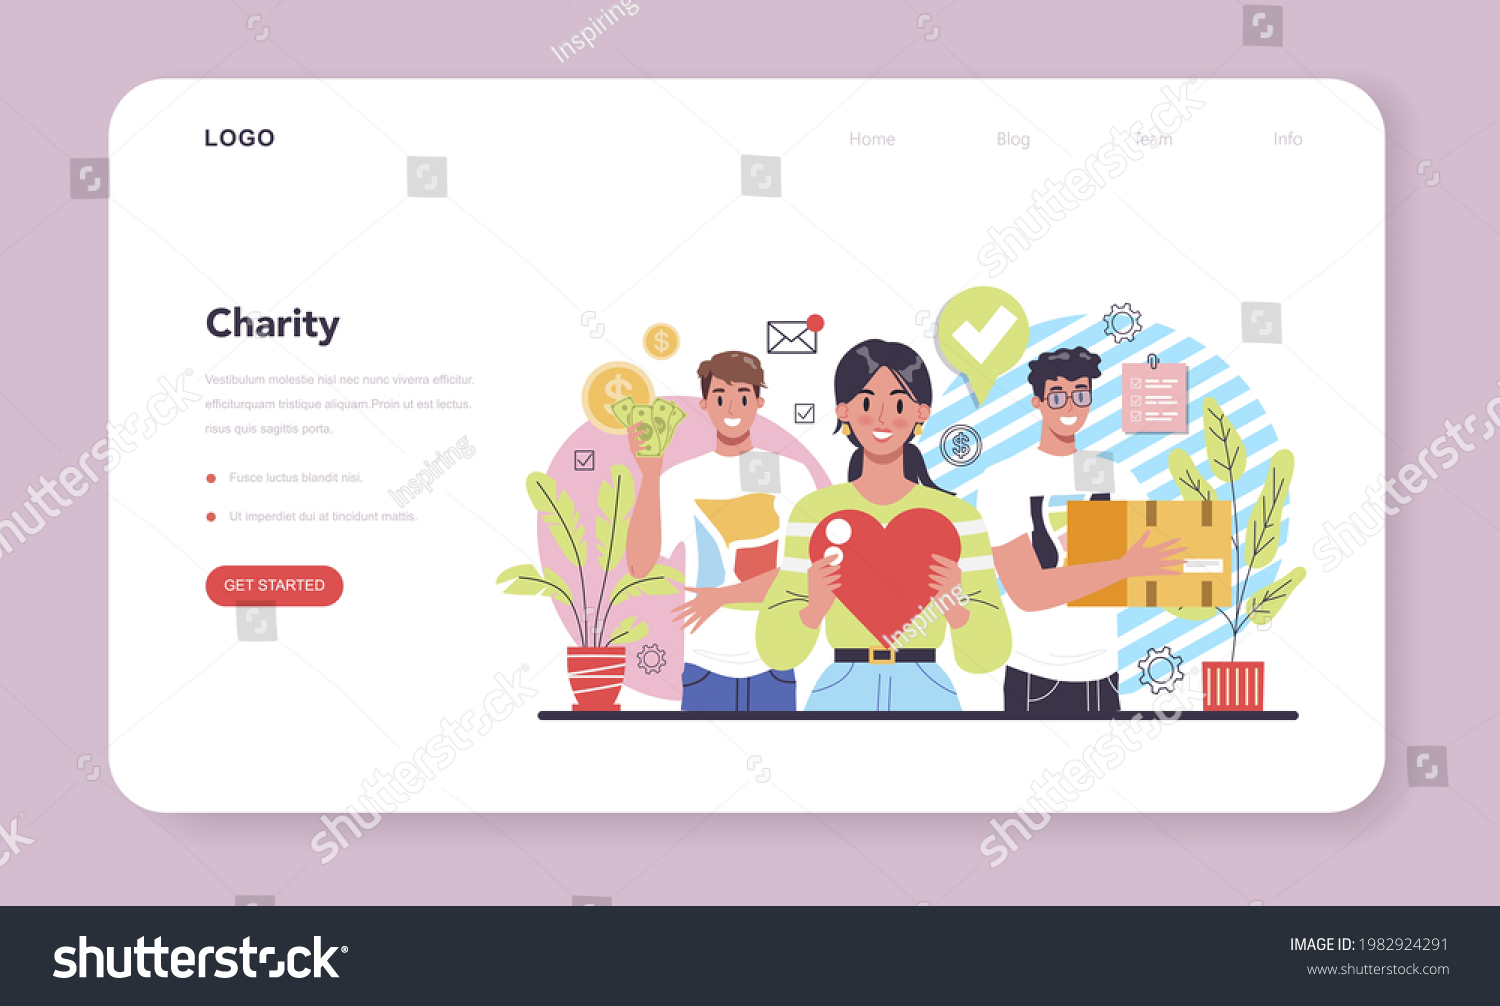 SVG of Charity web banner or landing page. People or volunteer donate stuff to help other people. Idea of humanitarian support and philanthropy. Isolated vector illustration in cartoon style svg